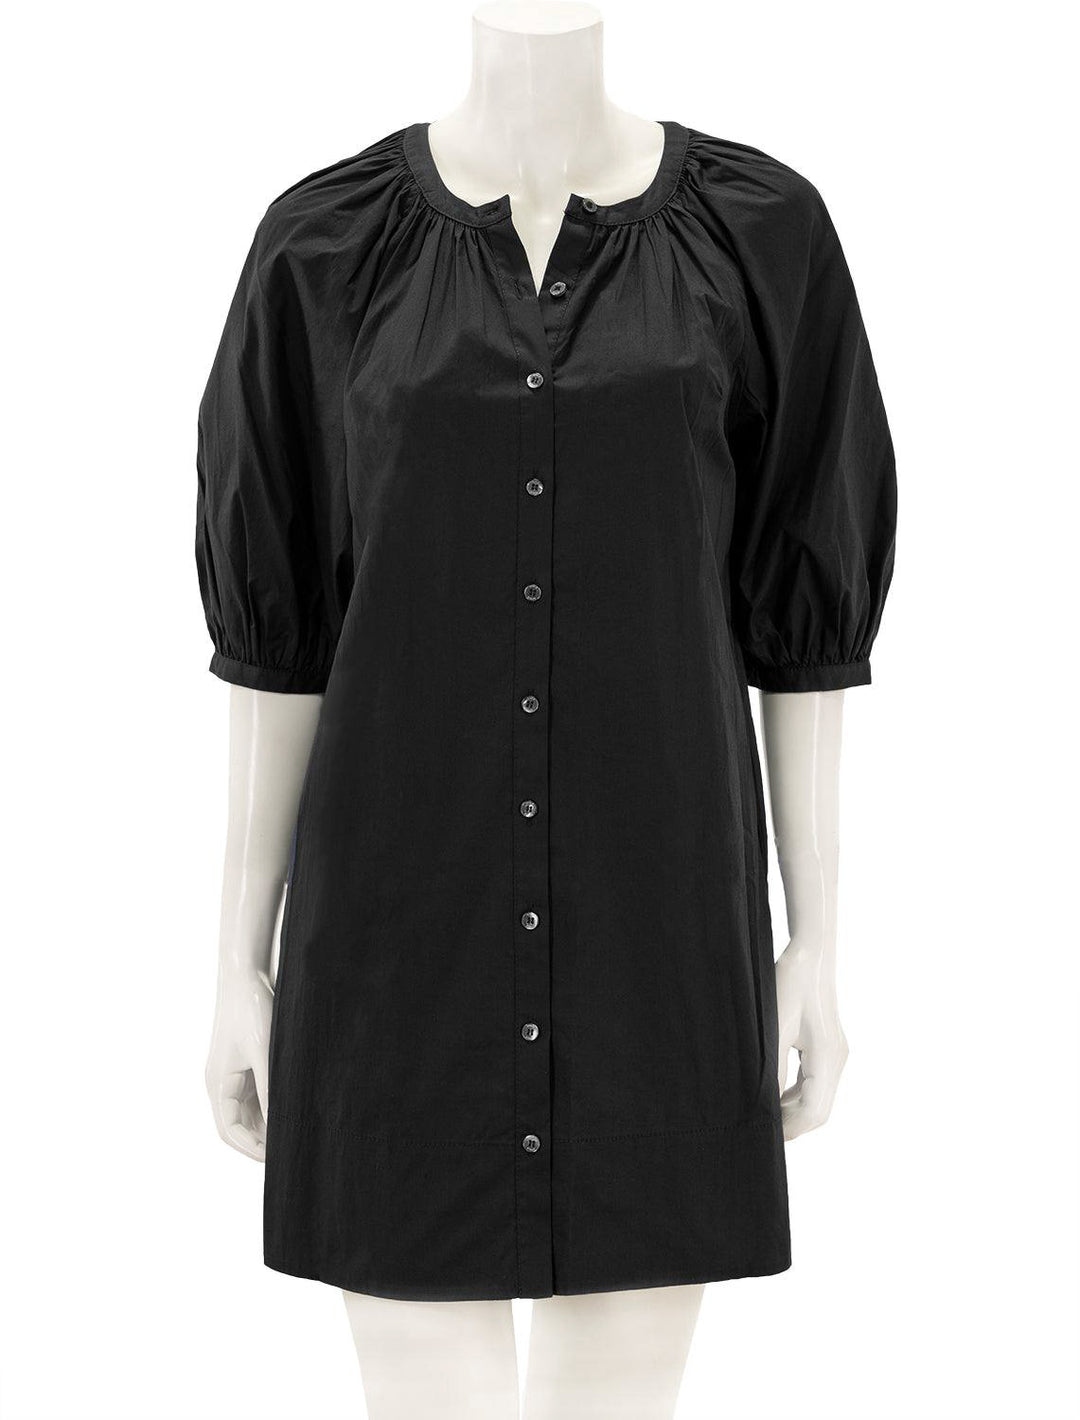 Front view of Staud's mini vincent dress in black.